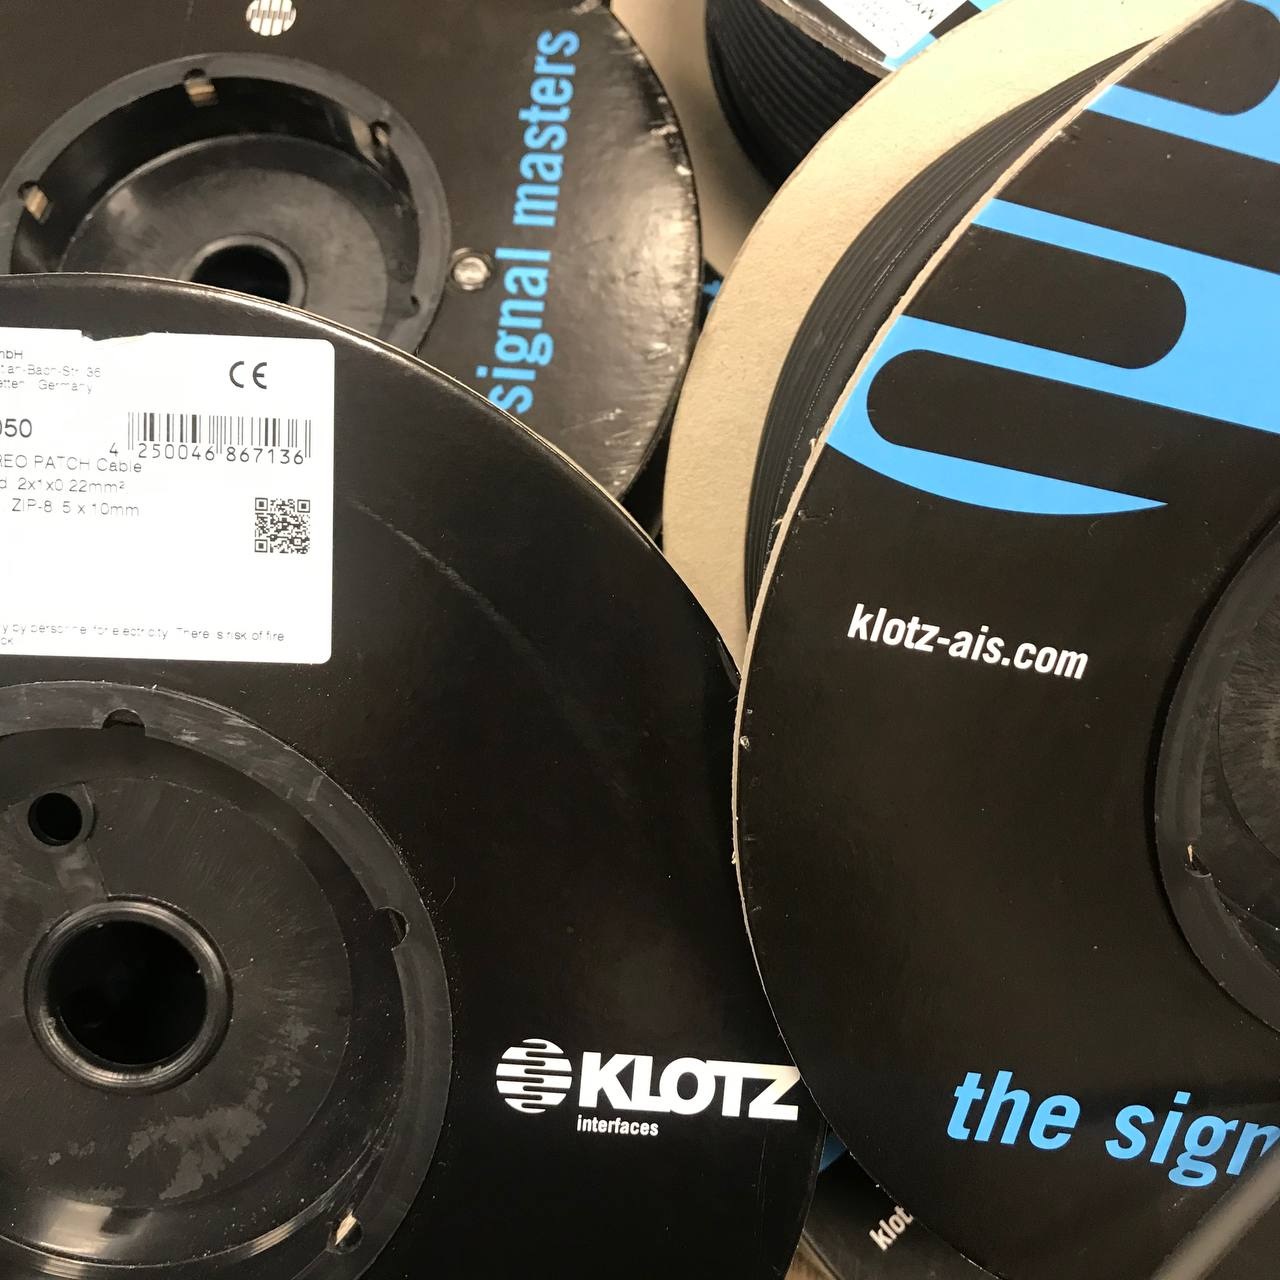 Sale of Bulk Cables from Klotz